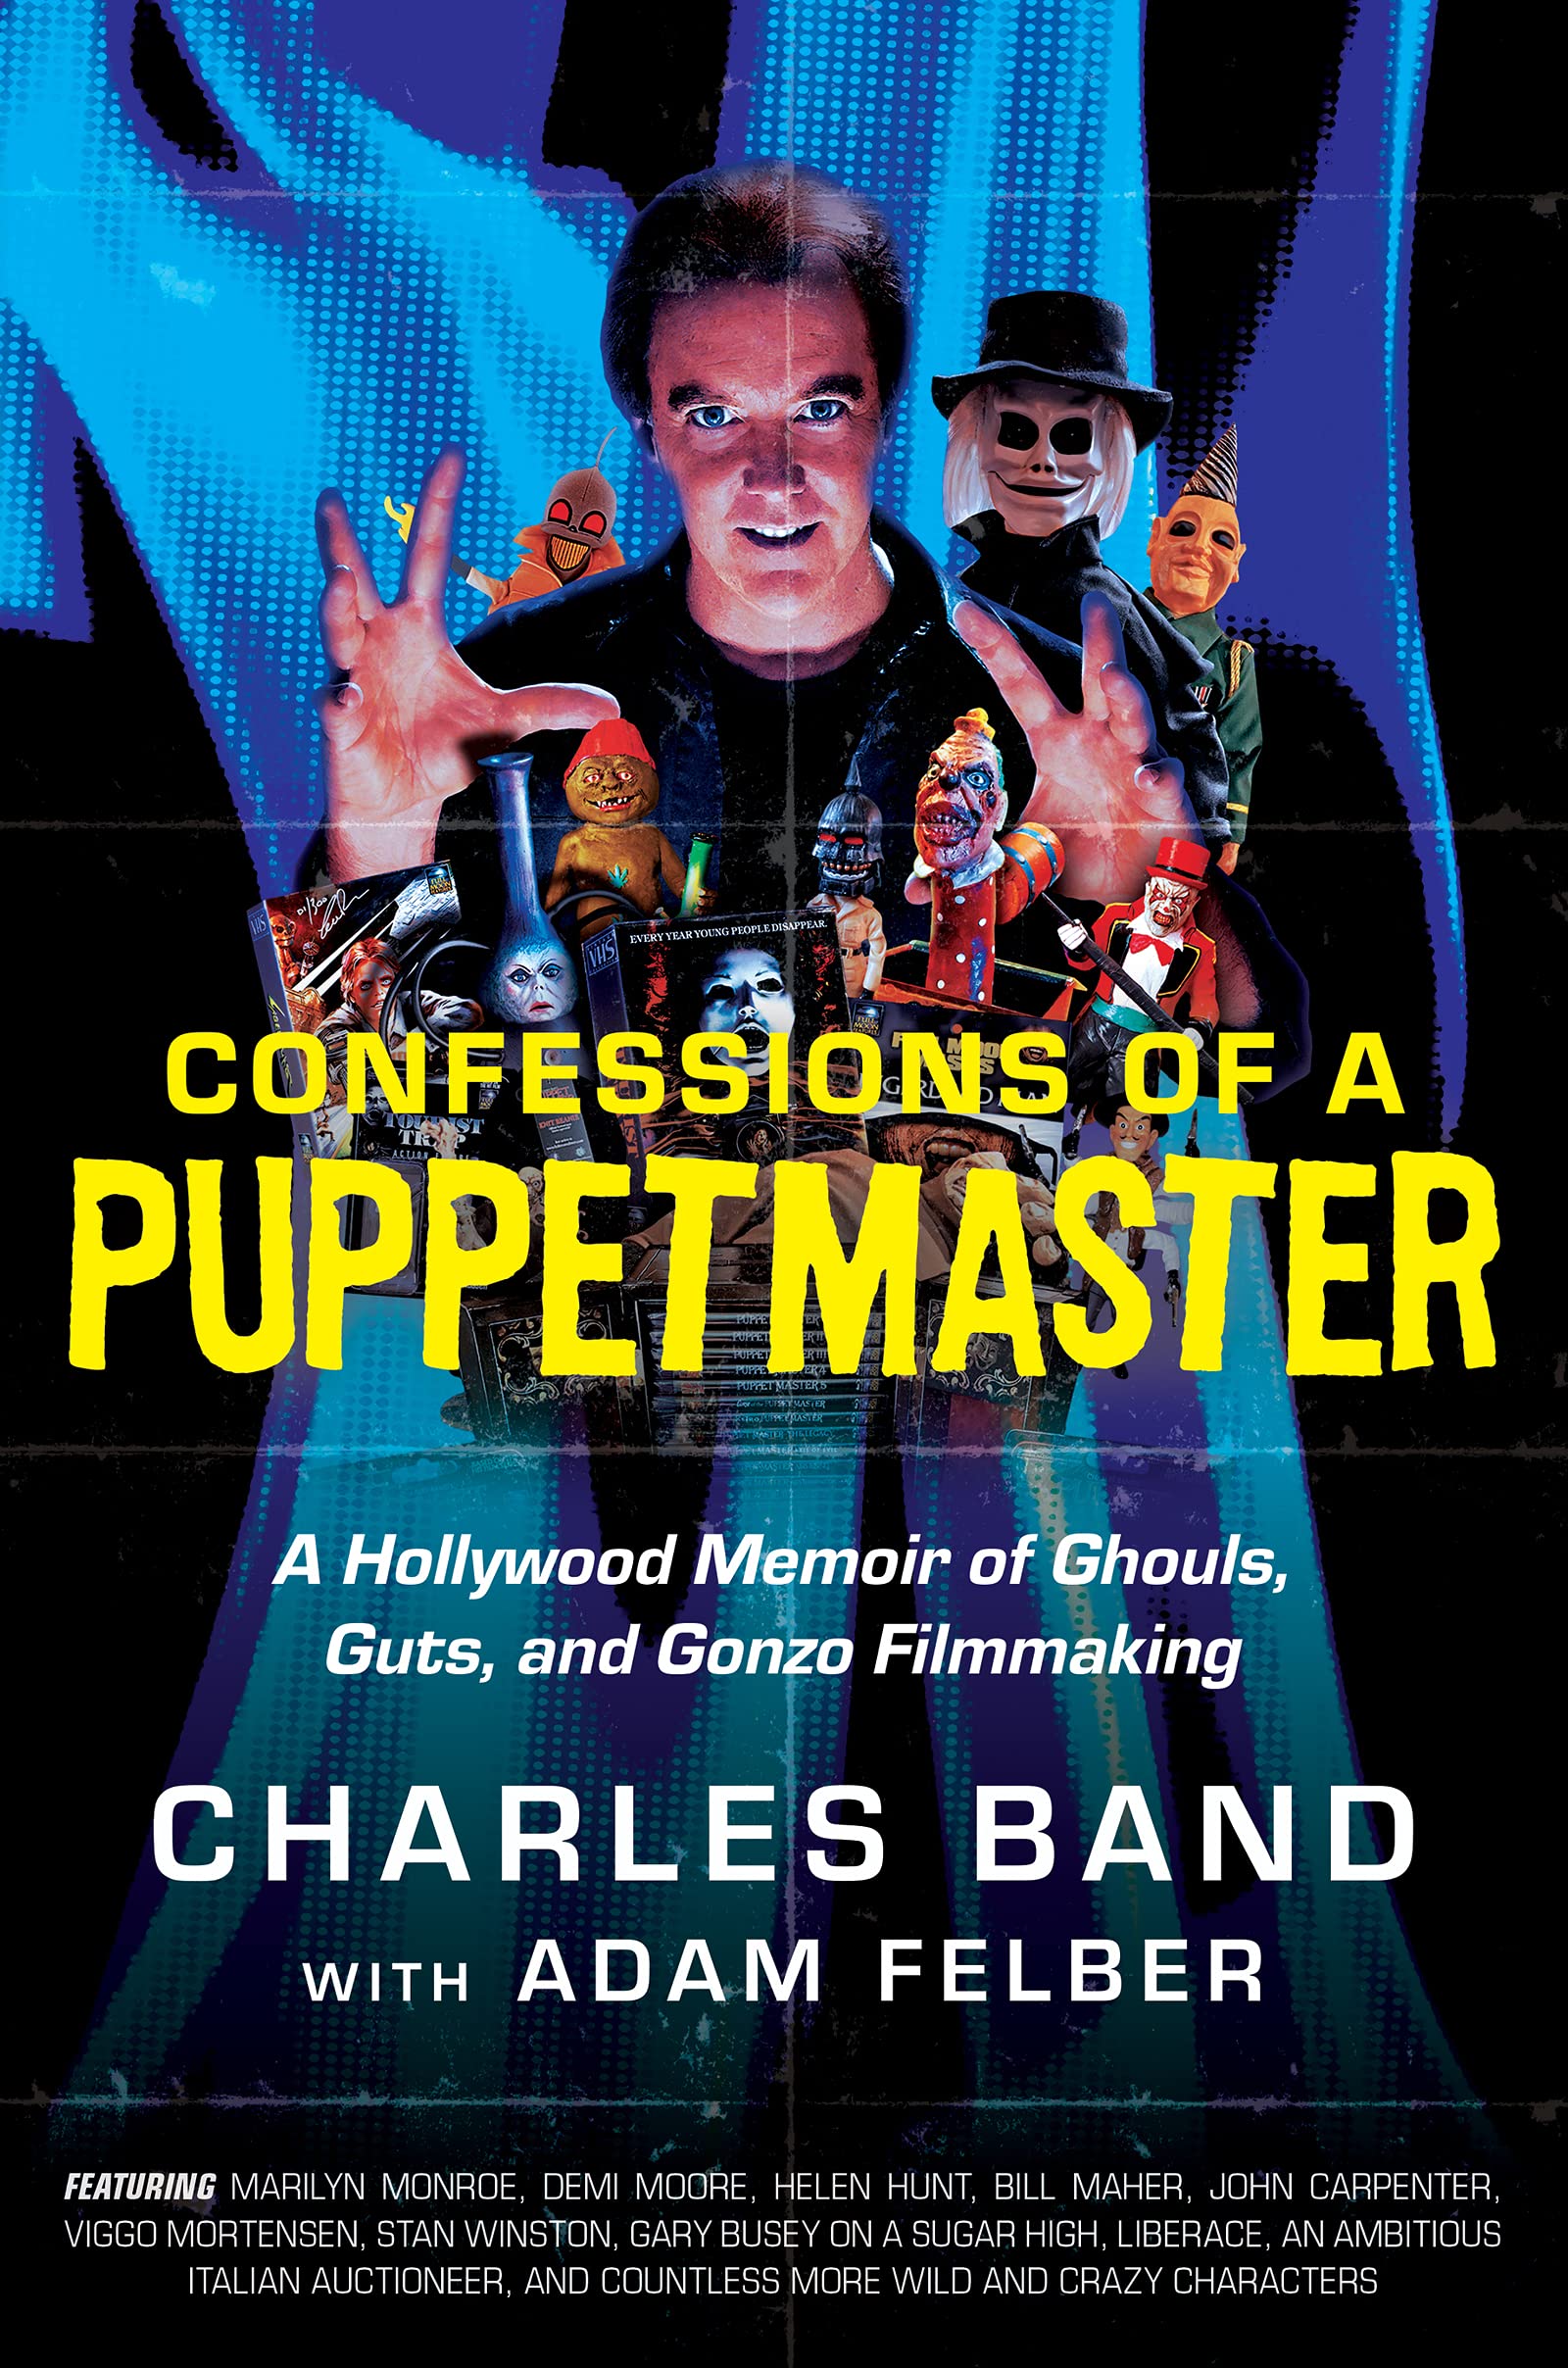 Confessions of a Puppetmaster Charles Band